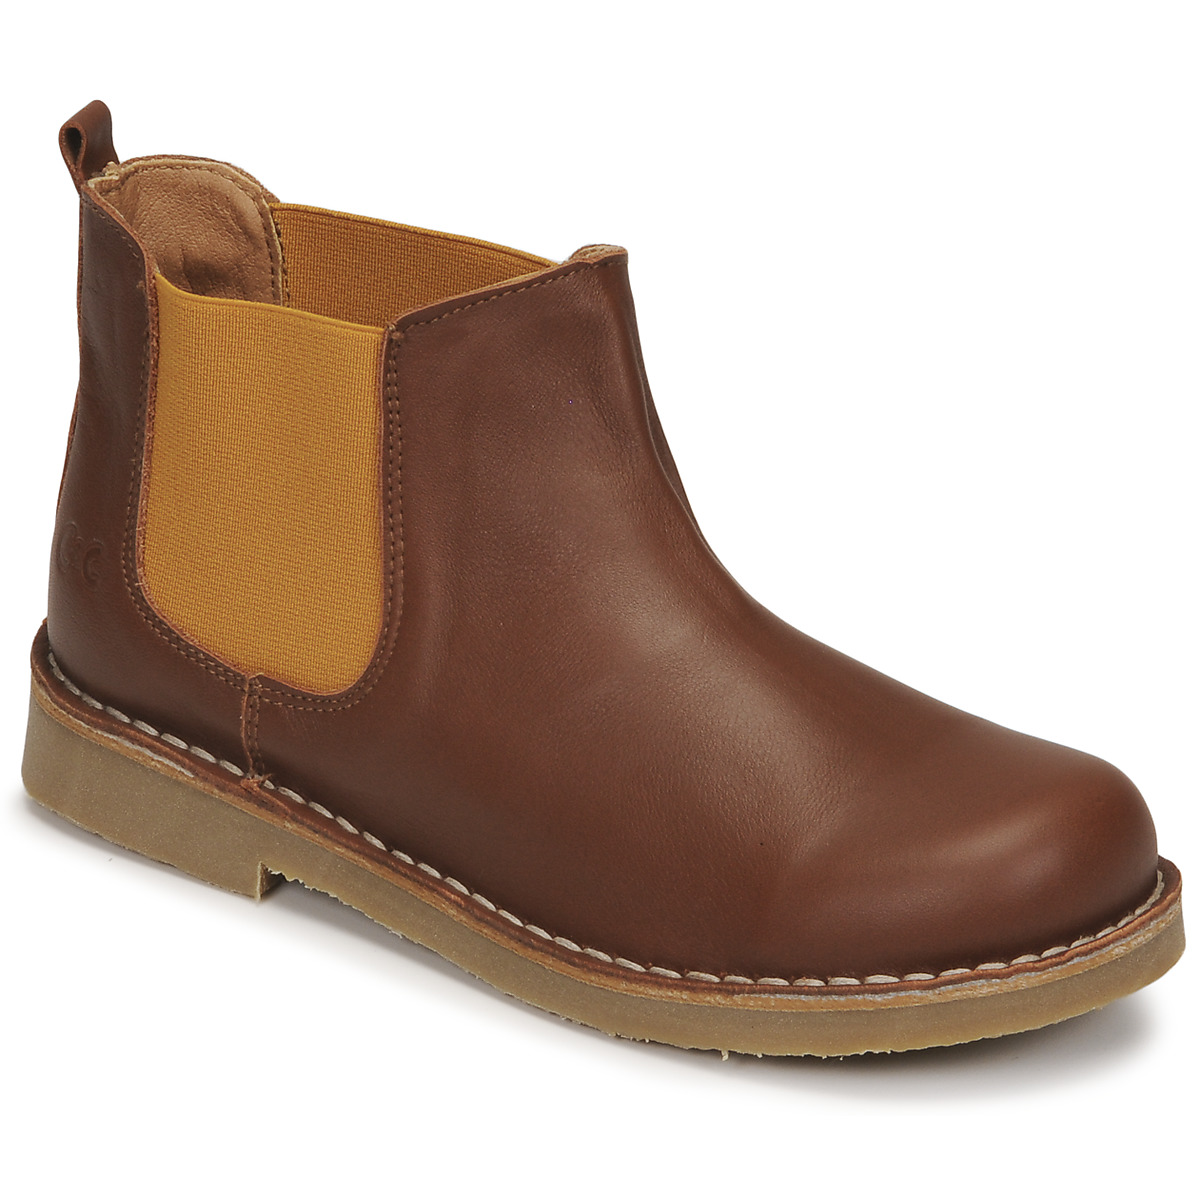 Chaussures Enfant Nice to wear with boots BONJOUR Cognac